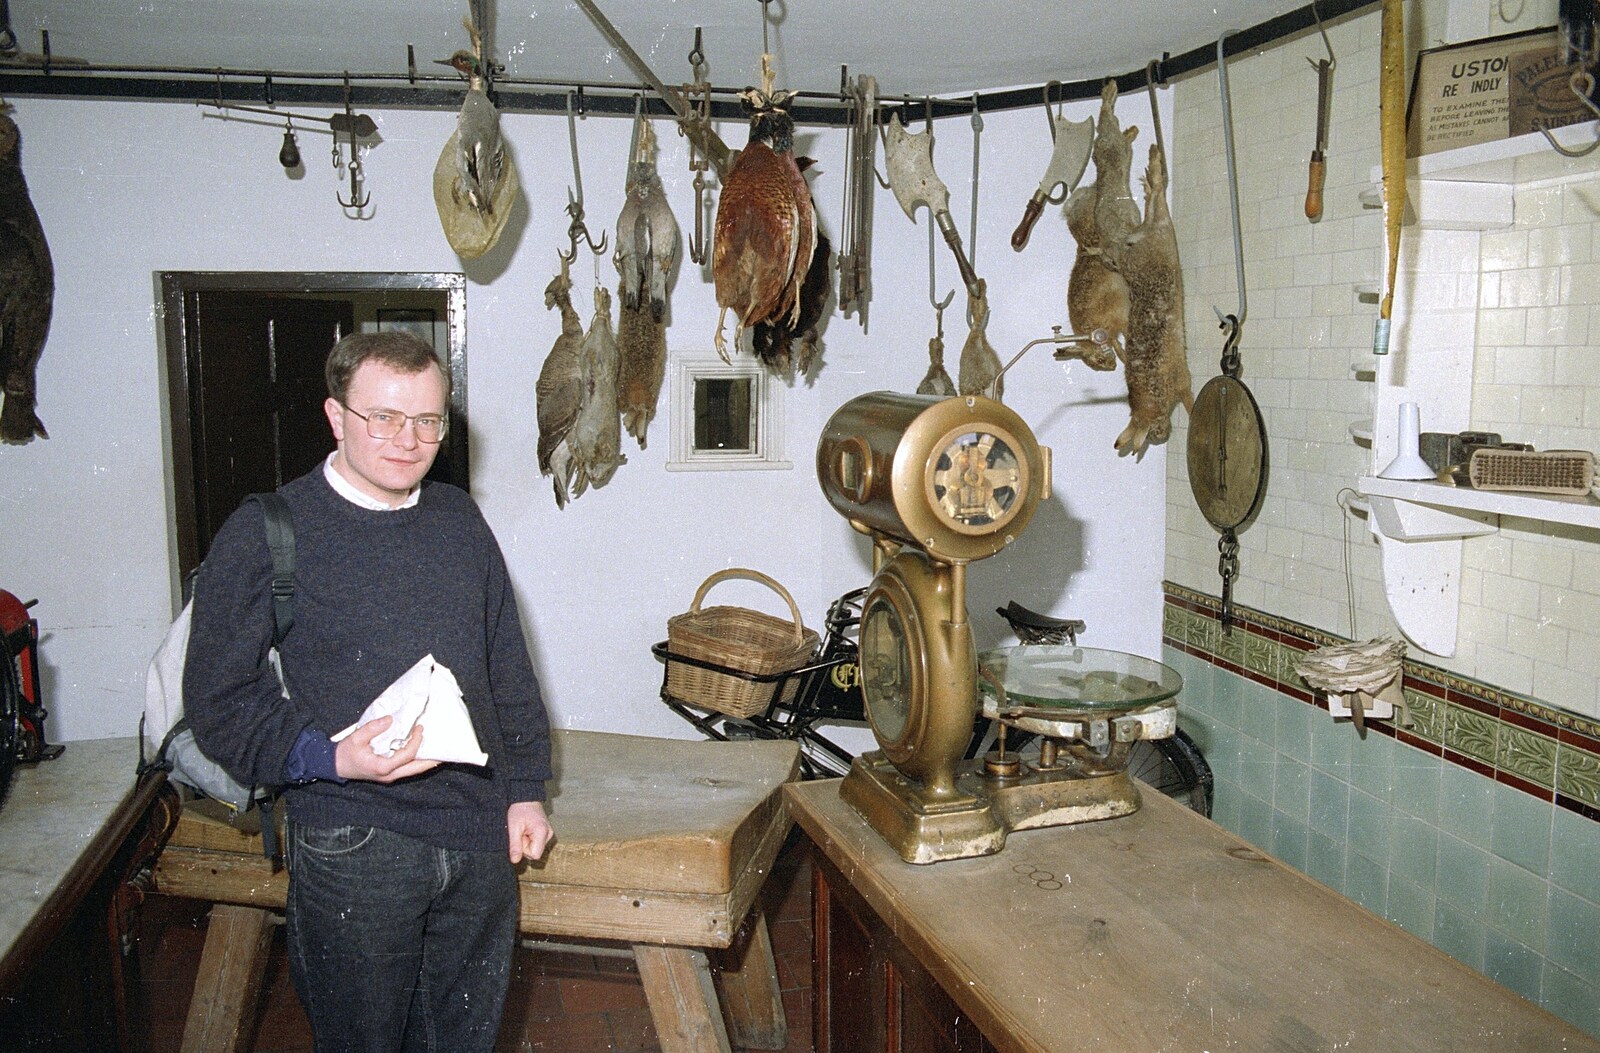 Hamish in an old butcher's shop from Capel Curig to Abergavenny: A Road-Trip With Hamish, Wales - 3rd April 1992